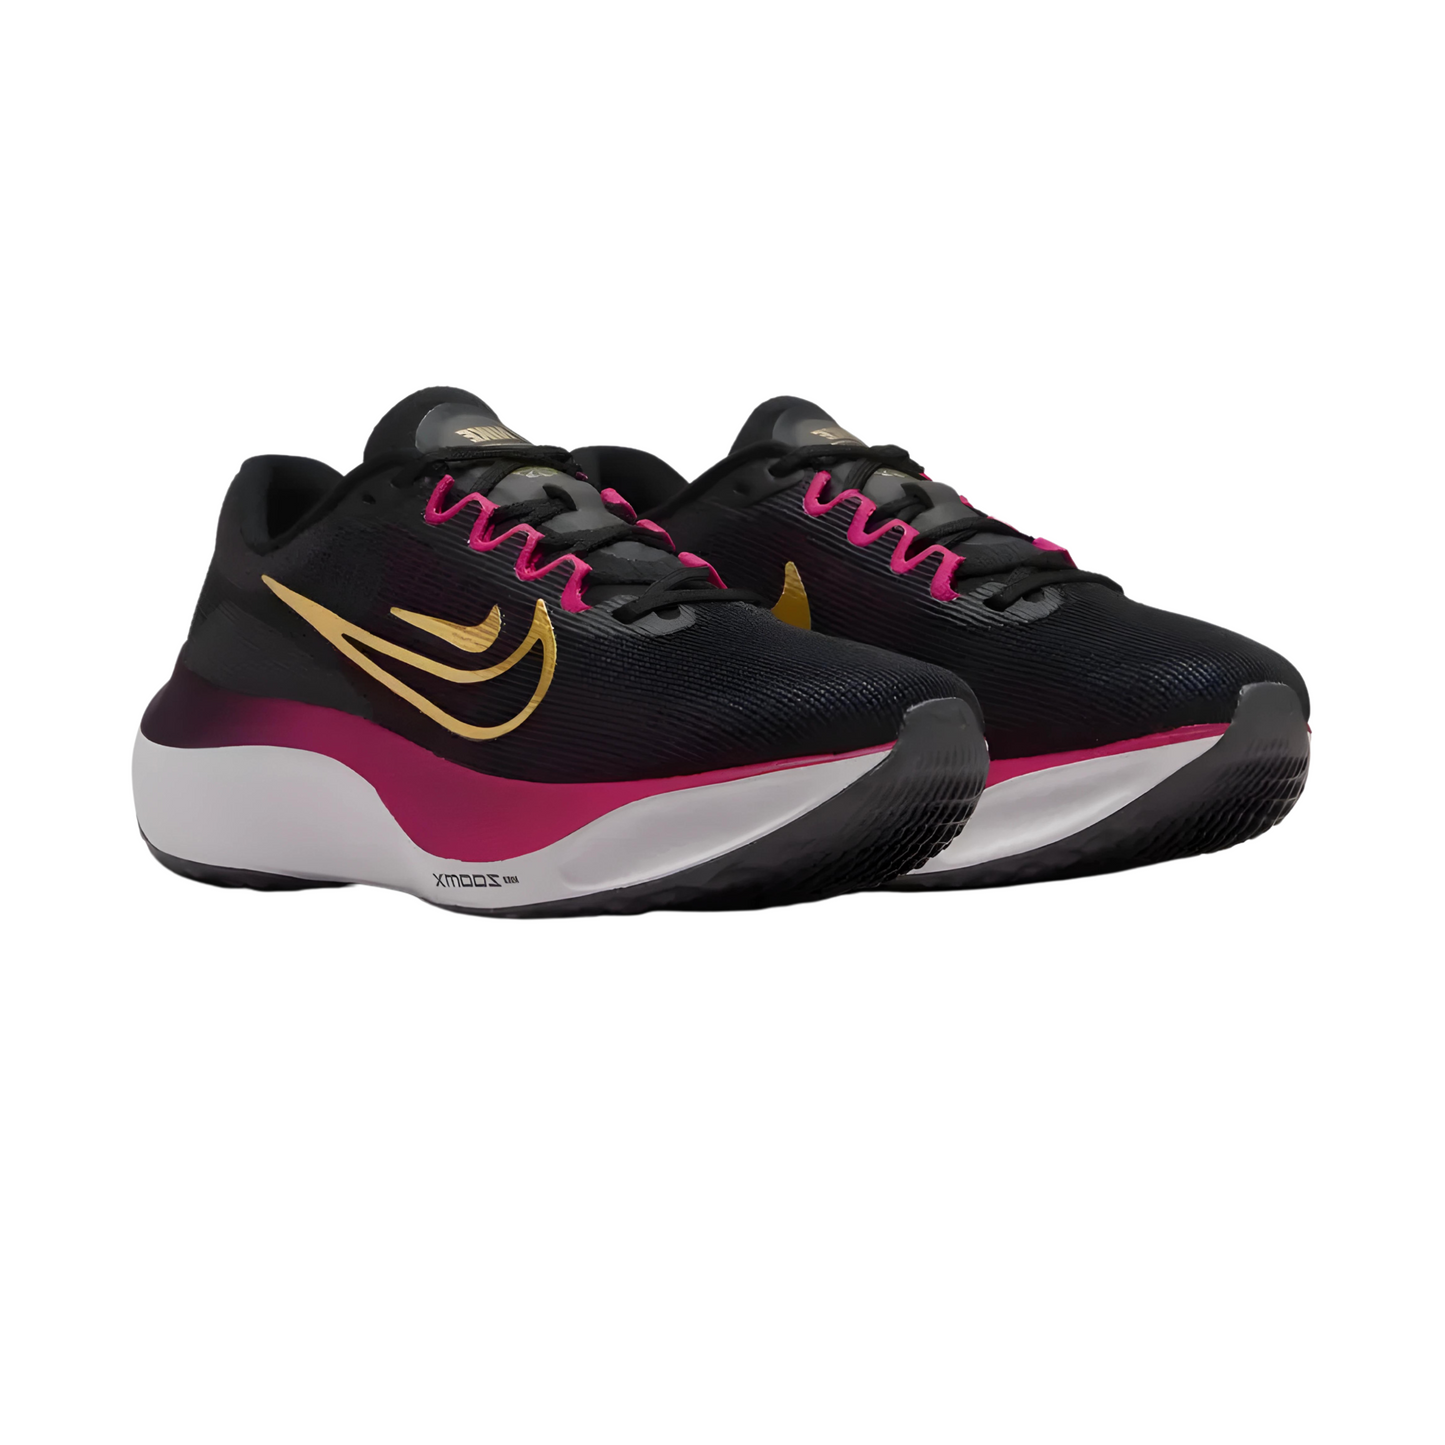 Nike, Zoom Fly 5 Running Shoes